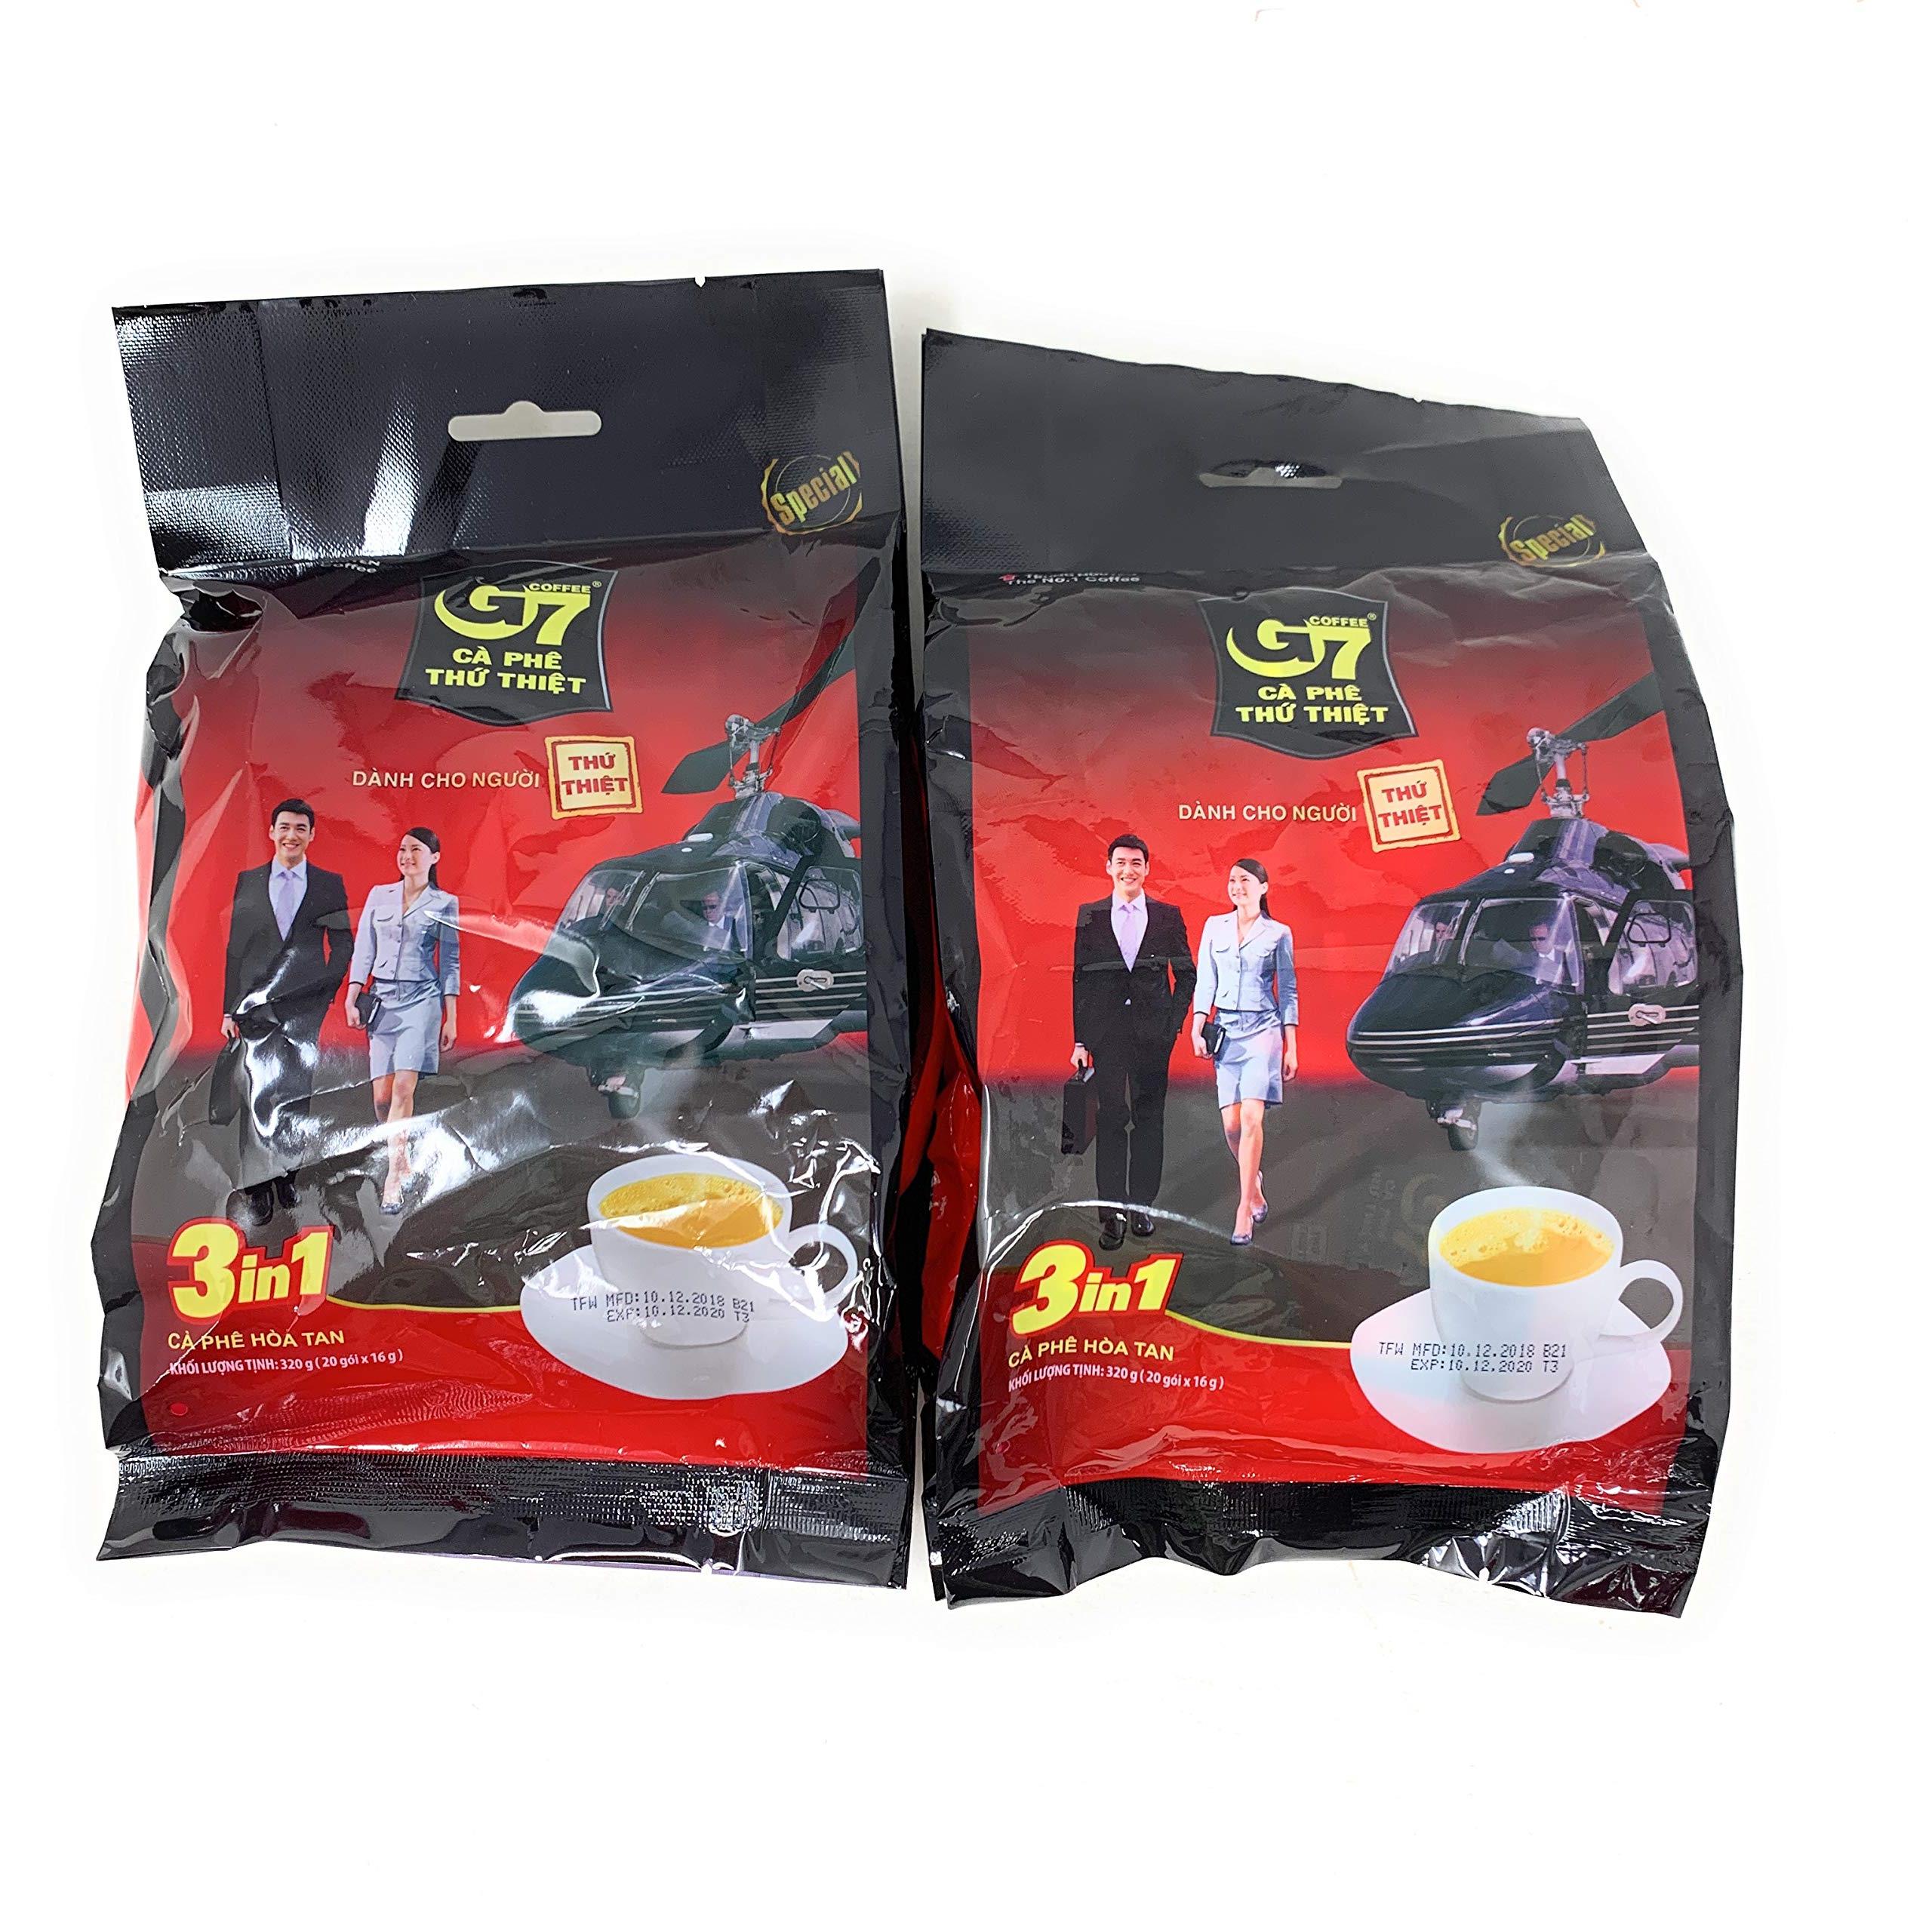 G7 Instant Coffee 3 in 1, Ca Phe Thu Thiet 320g, 2 Pack